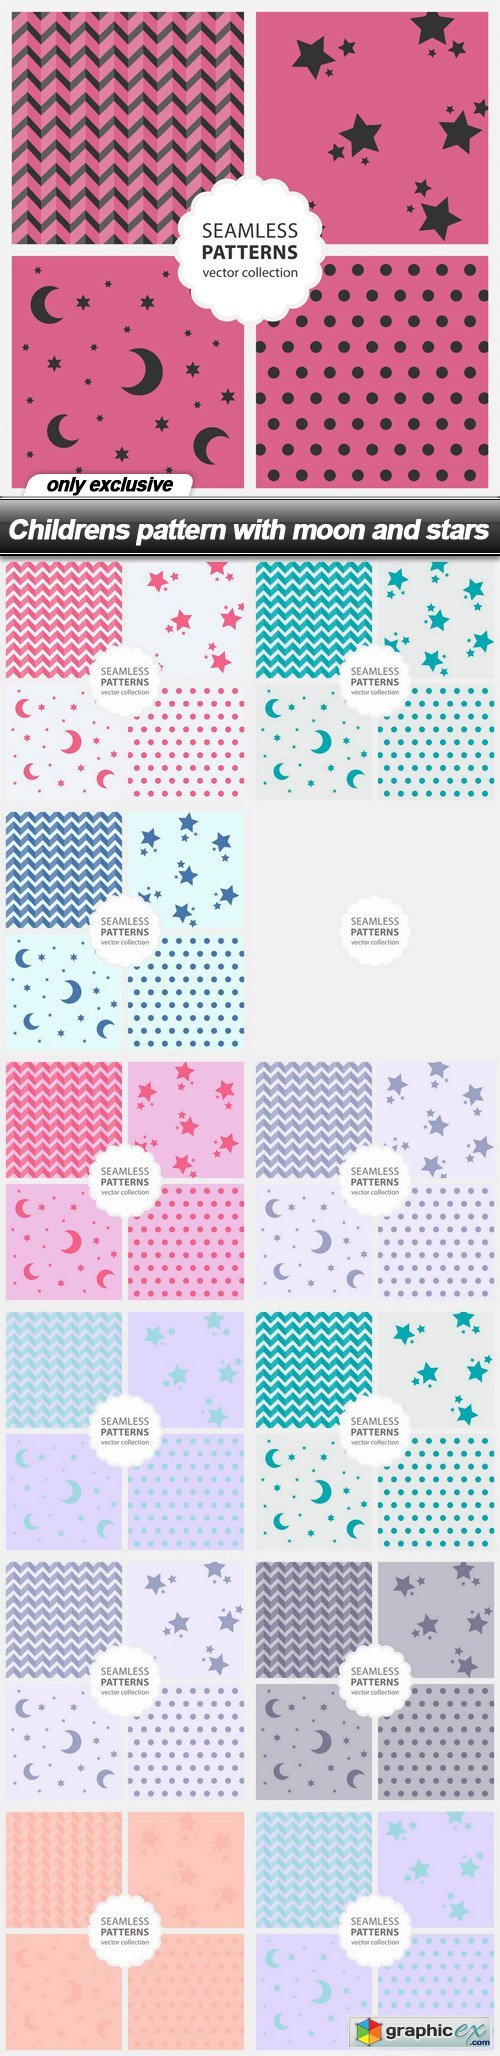 Childrens pattern with moon and stars - 13 EPS